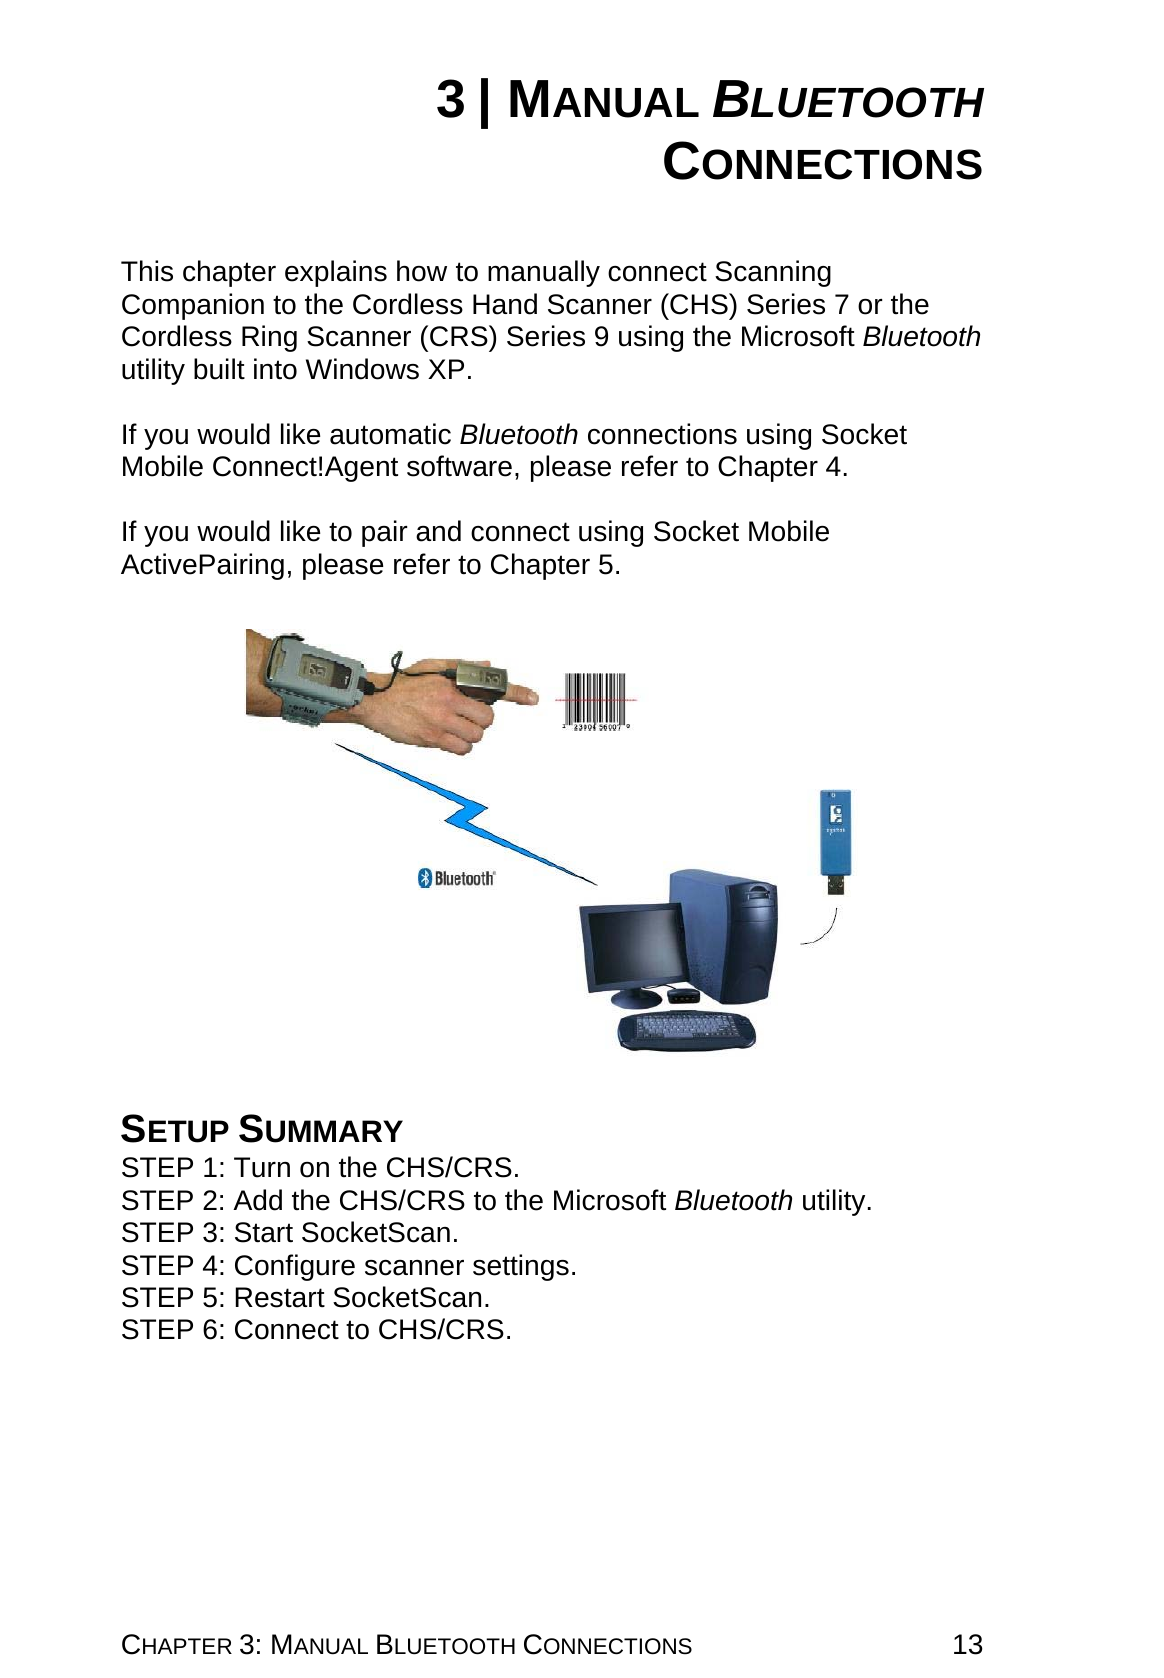 CHAPTER 3: MANUAL BLUETOOTH CONNECTIONS 13 3 | MANUAL BLUETOOTH CONNECTIONS   This chapter explains how to manually connect Scanning Companion to the Cordless Hand Scanner (CHS) Series 7 or the Cordless Ring Scanner (CRS) Series 9 using the Microsoft Bluetooth utility built into Windows XP.  If you would like automatic Bluetooth connections using Socket Mobile Connect!Agent software, please refer to Chapter 4.   If you would like to pair and connect using Socket Mobile ActivePairing, please refer to Chapter 5.      SETUP SUMMARY STEP 1: Turn on the CHS/CRS. STEP 2: Add the CHS/CRS to the Microsoft Bluetooth utility. STEP 3: Start SocketScan. STEP 4: Configure scanner settings. STEP 5: Restart SocketScan. STEP 6: Connect to CHS/CRS. 